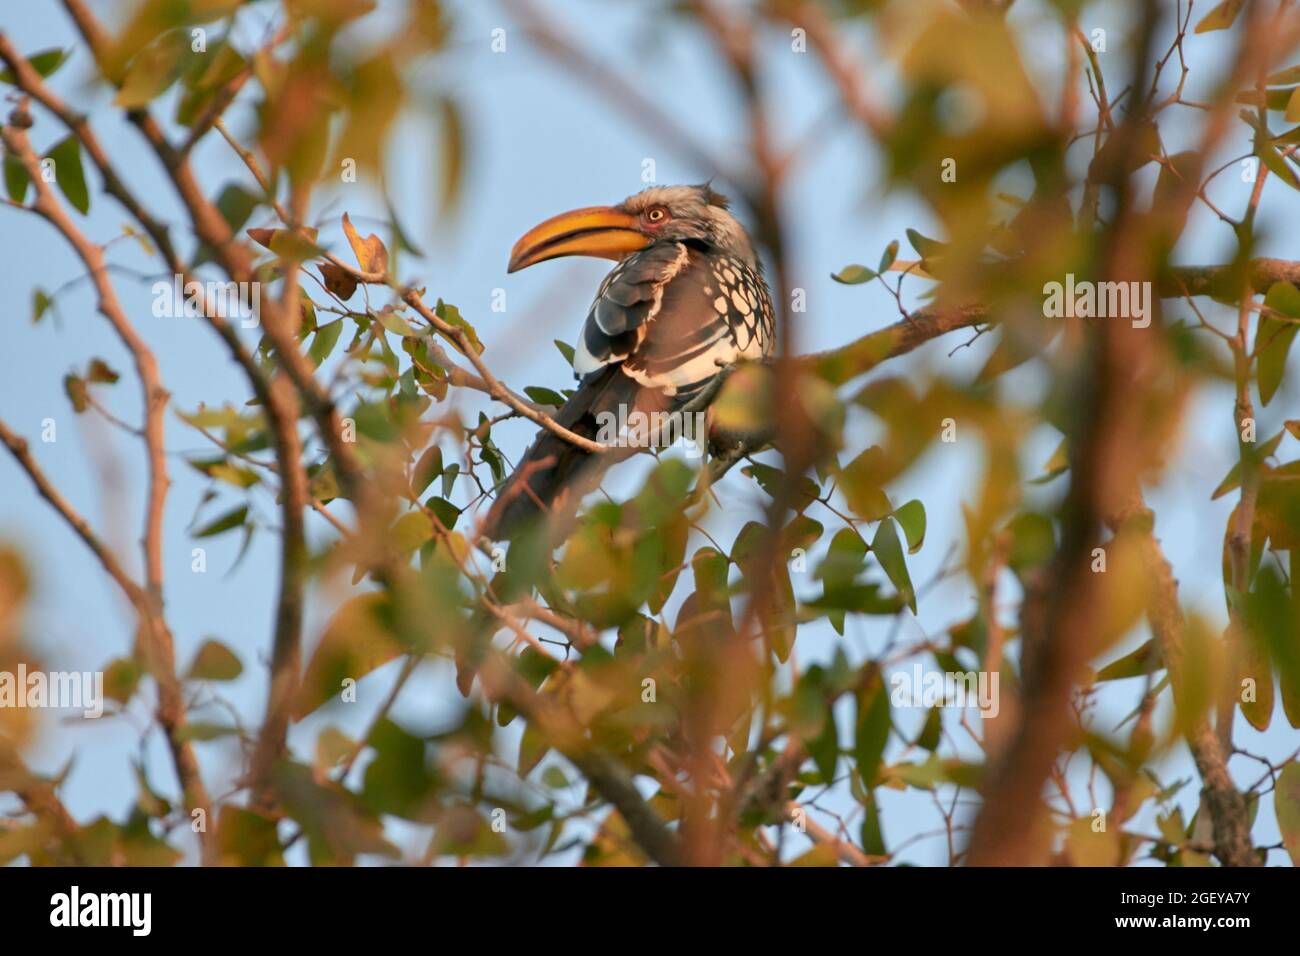 Southern yellow-billed hornbill (Tockus leucomelas) perched in tree at Etosha National Park, Namibia, Africa Stock Photo